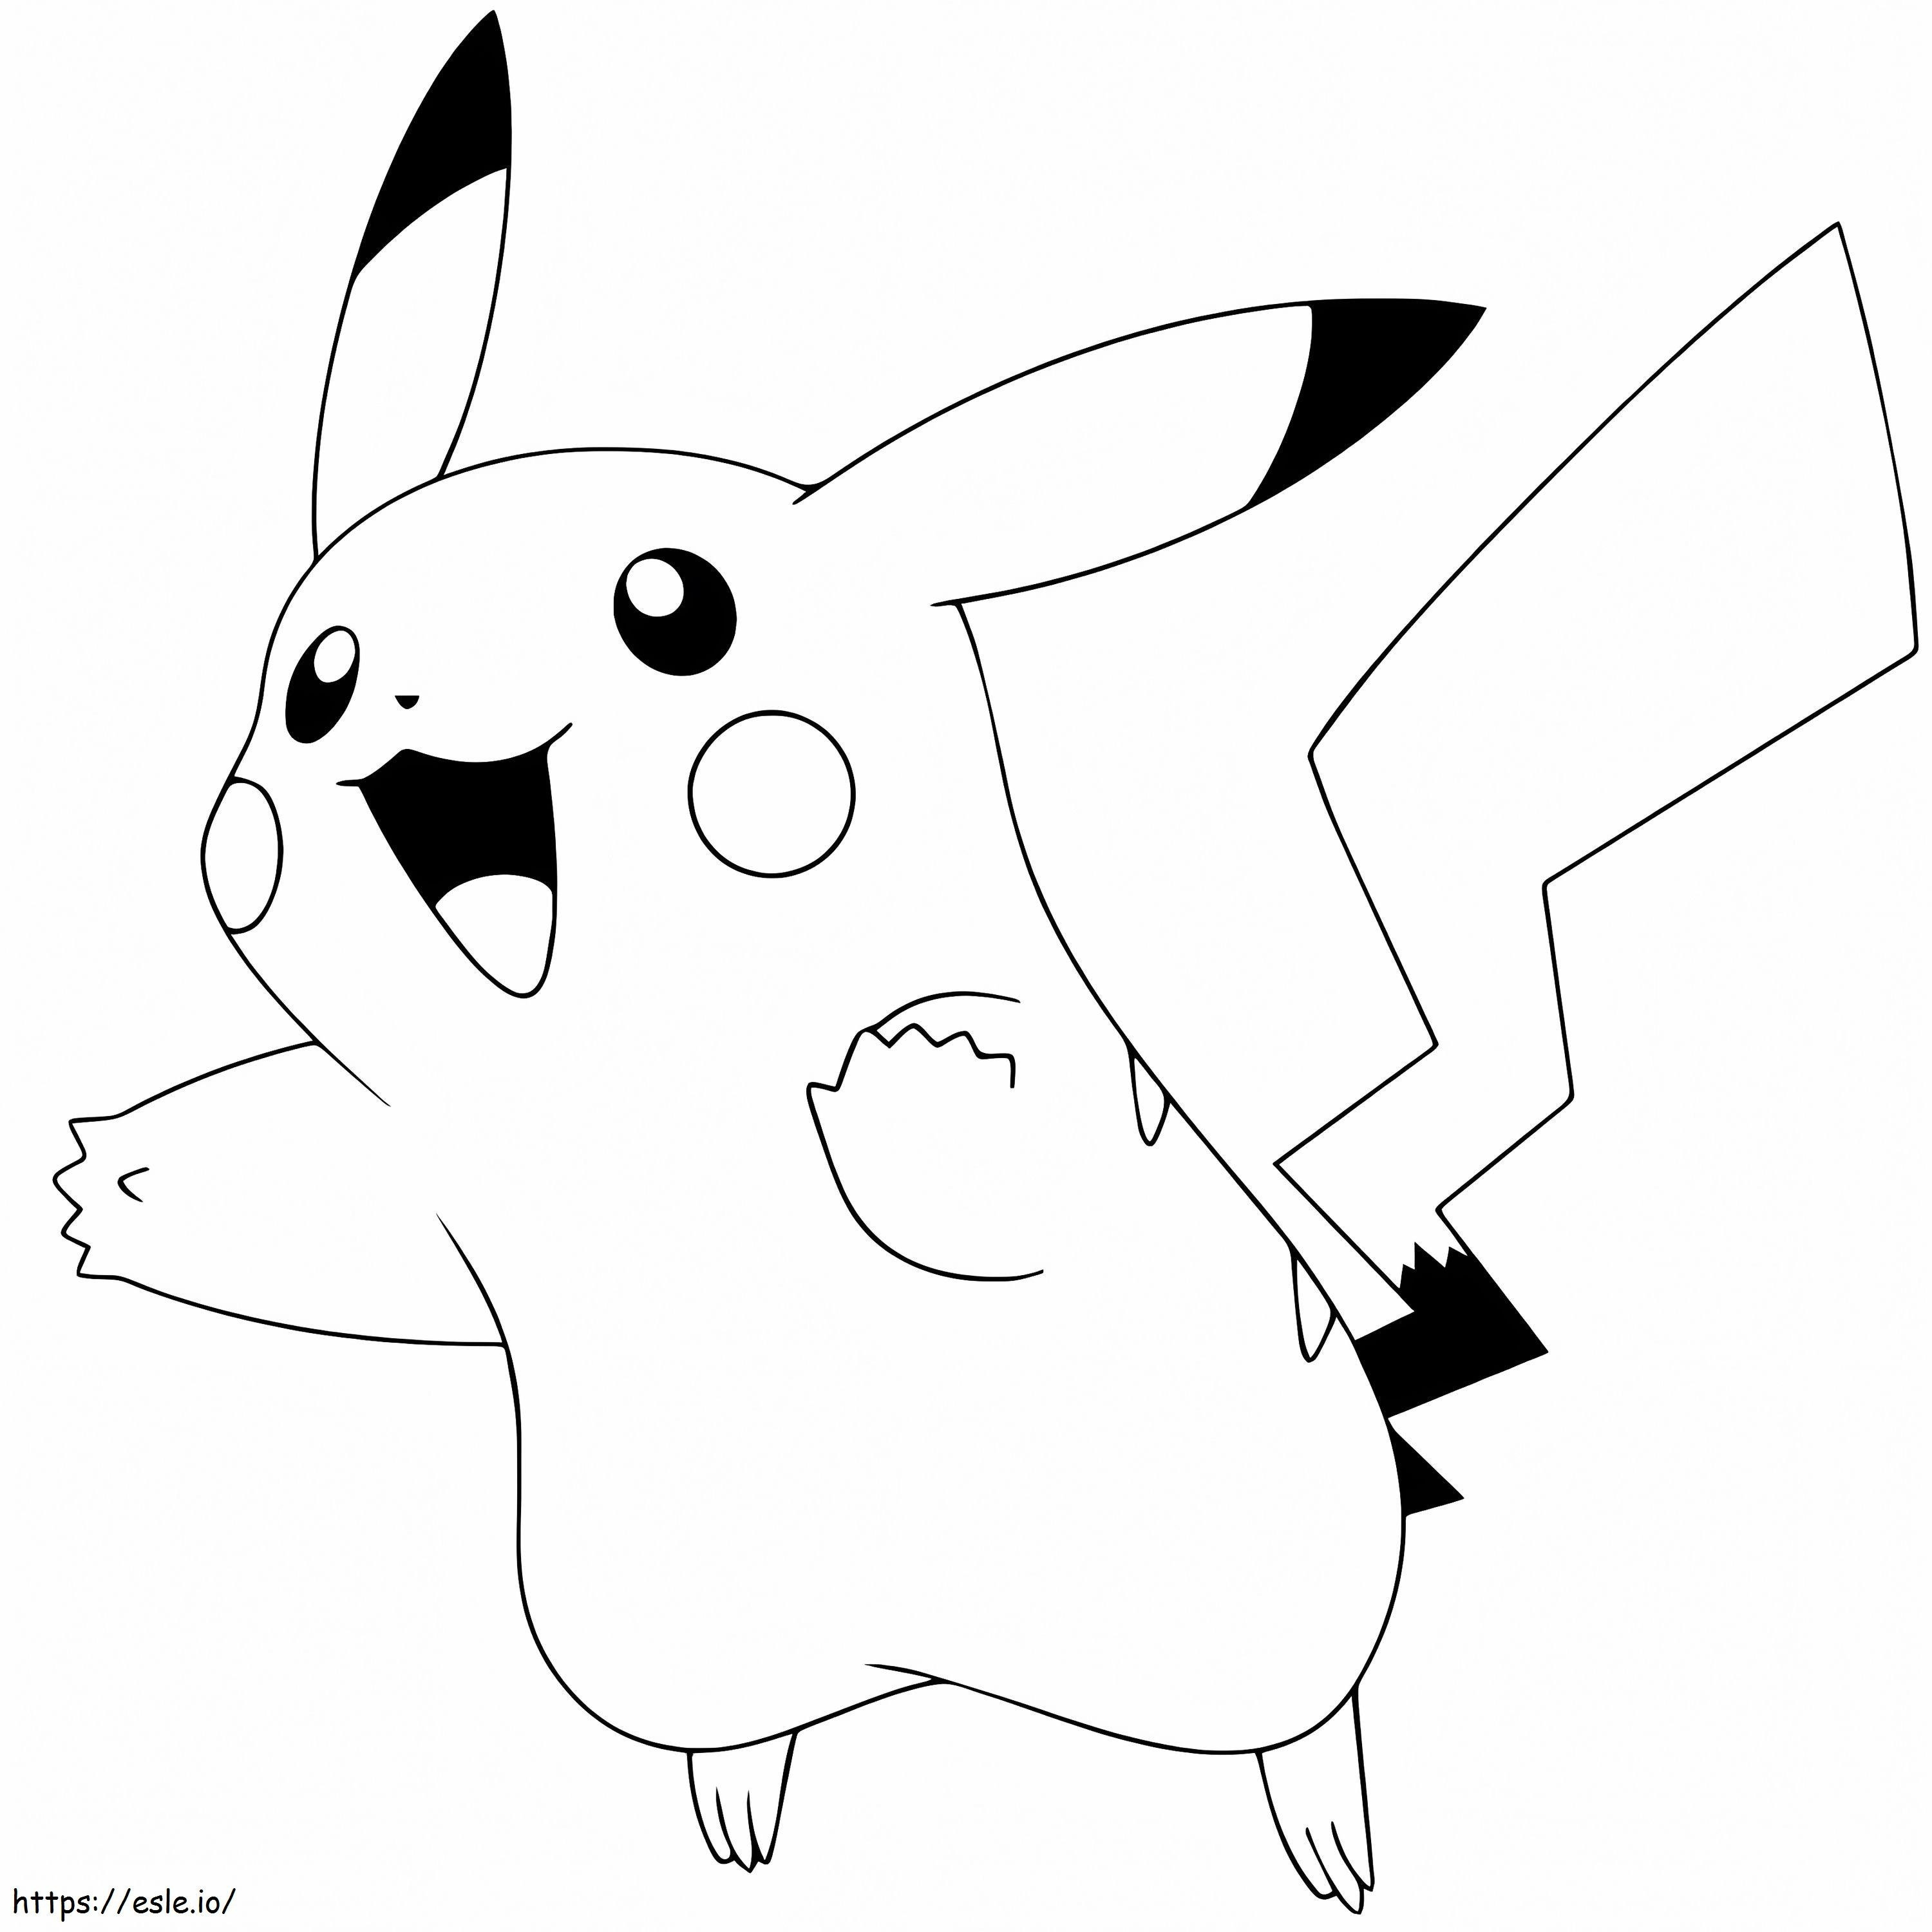 Pikachu Looks Happy coloring page